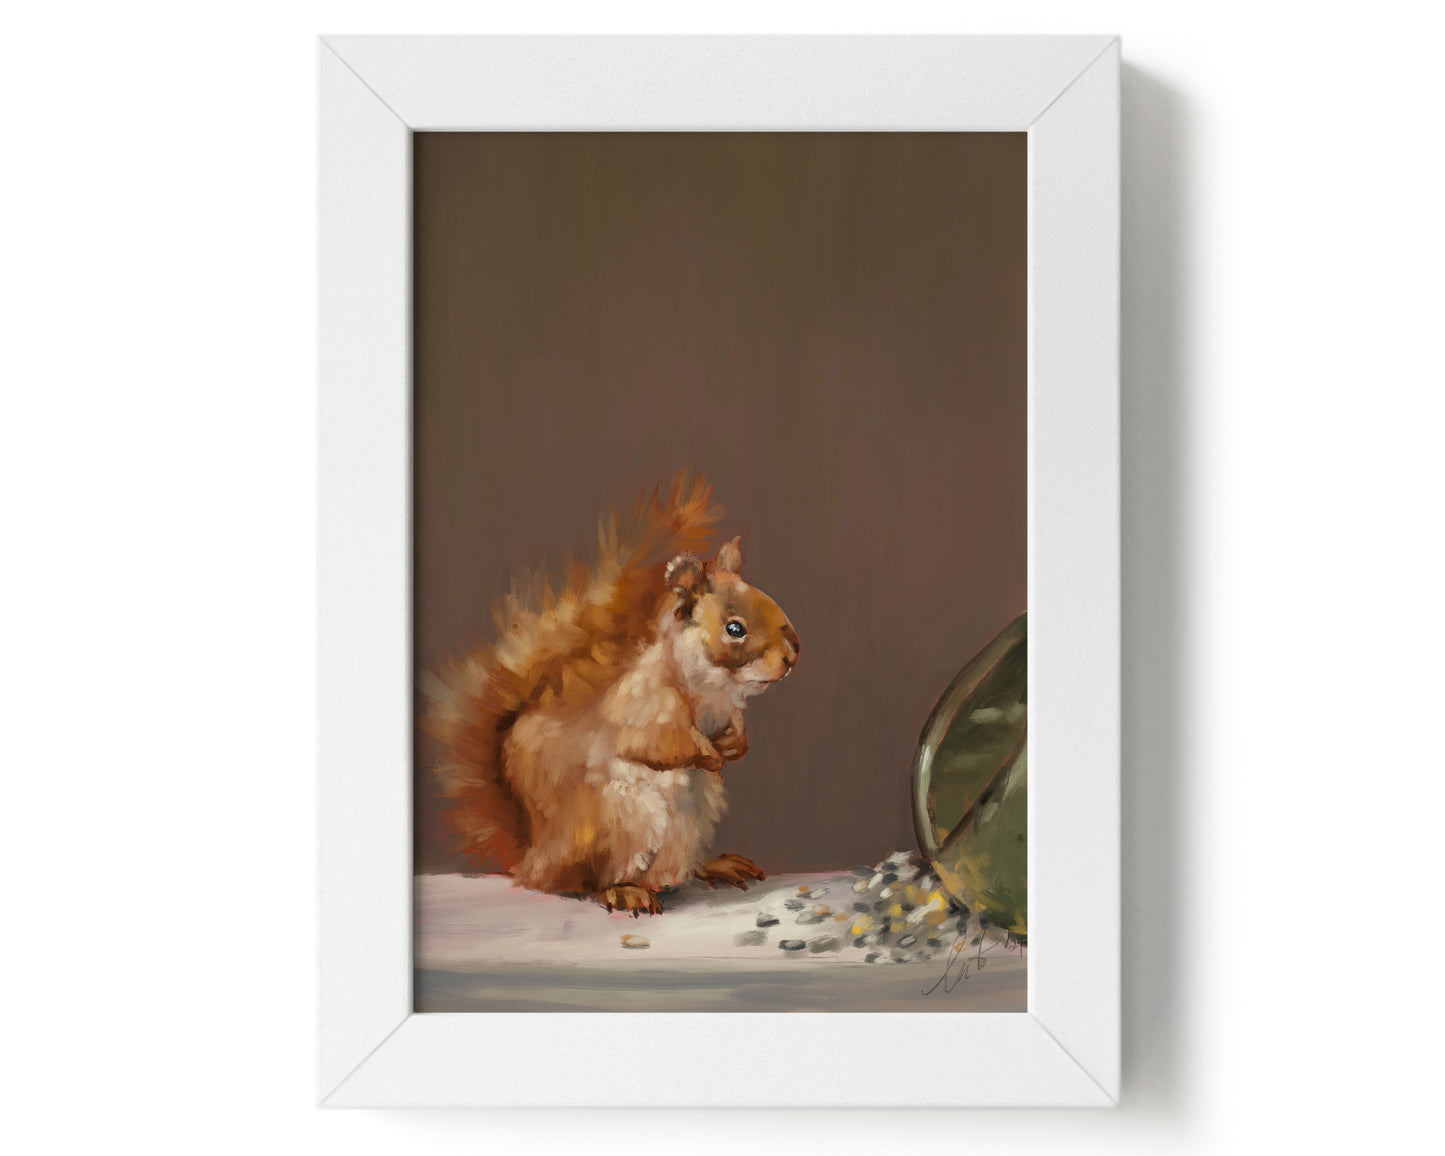 "Titi the Squirrel" by Catherine Hébert - Red Squirrel Oil Painting Giclée Art Print - 0"x0" size